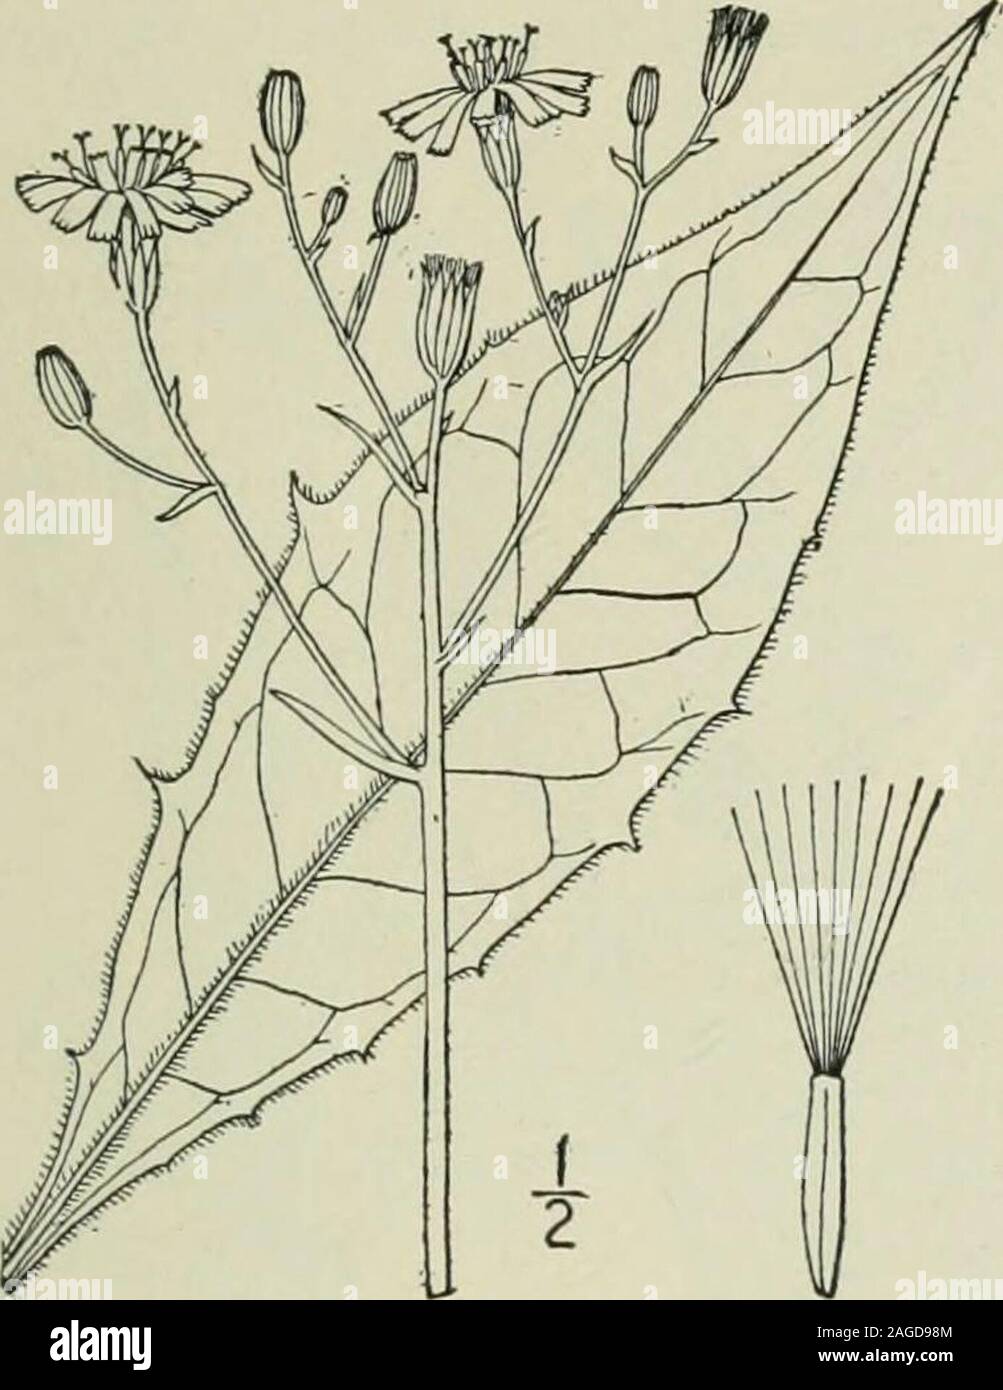 . An illustrated flora of the northern United States, Canada and the British possessions : from Newfoundland to the parallel of the southern boundary of Virginia and from the Atlantic Ocean westward to the 102nd meridian. d about Quebec. Adventive or fugitive fromEurope. French or golden lungwort. June-Aug. 2. Hieracium vulgatum Fries. Hawkweed. l^^ig- 4095- H. molle Pursh, Fl. Am. Sept. 503. 1814. Not Jacq. 1774.H. vulgatum Fries, Fl. Hall. 128. 1817-18. Similar to the preceding species, sometimes tallerand slightly glaucous; stem 2-5-leaved, pubescent orglabrate. Basal leaves oblong or lance Stock Photo